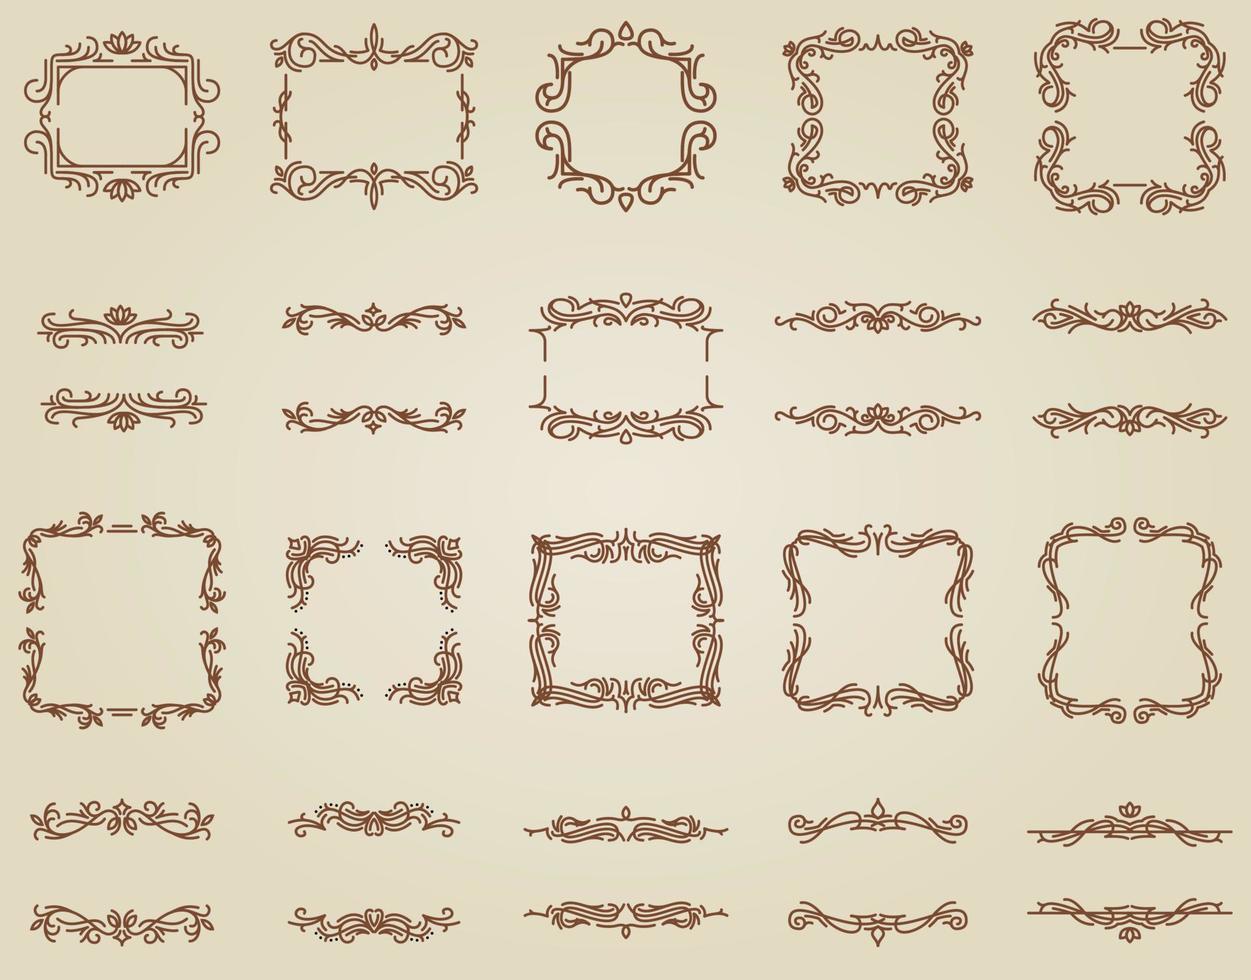 Vintage calligraphic Retro elements. decorative frames, flourish dividers, borders. beautiful swirls sink decorated with motifs and scrolls. circle, square and rectangular frames for cards vector